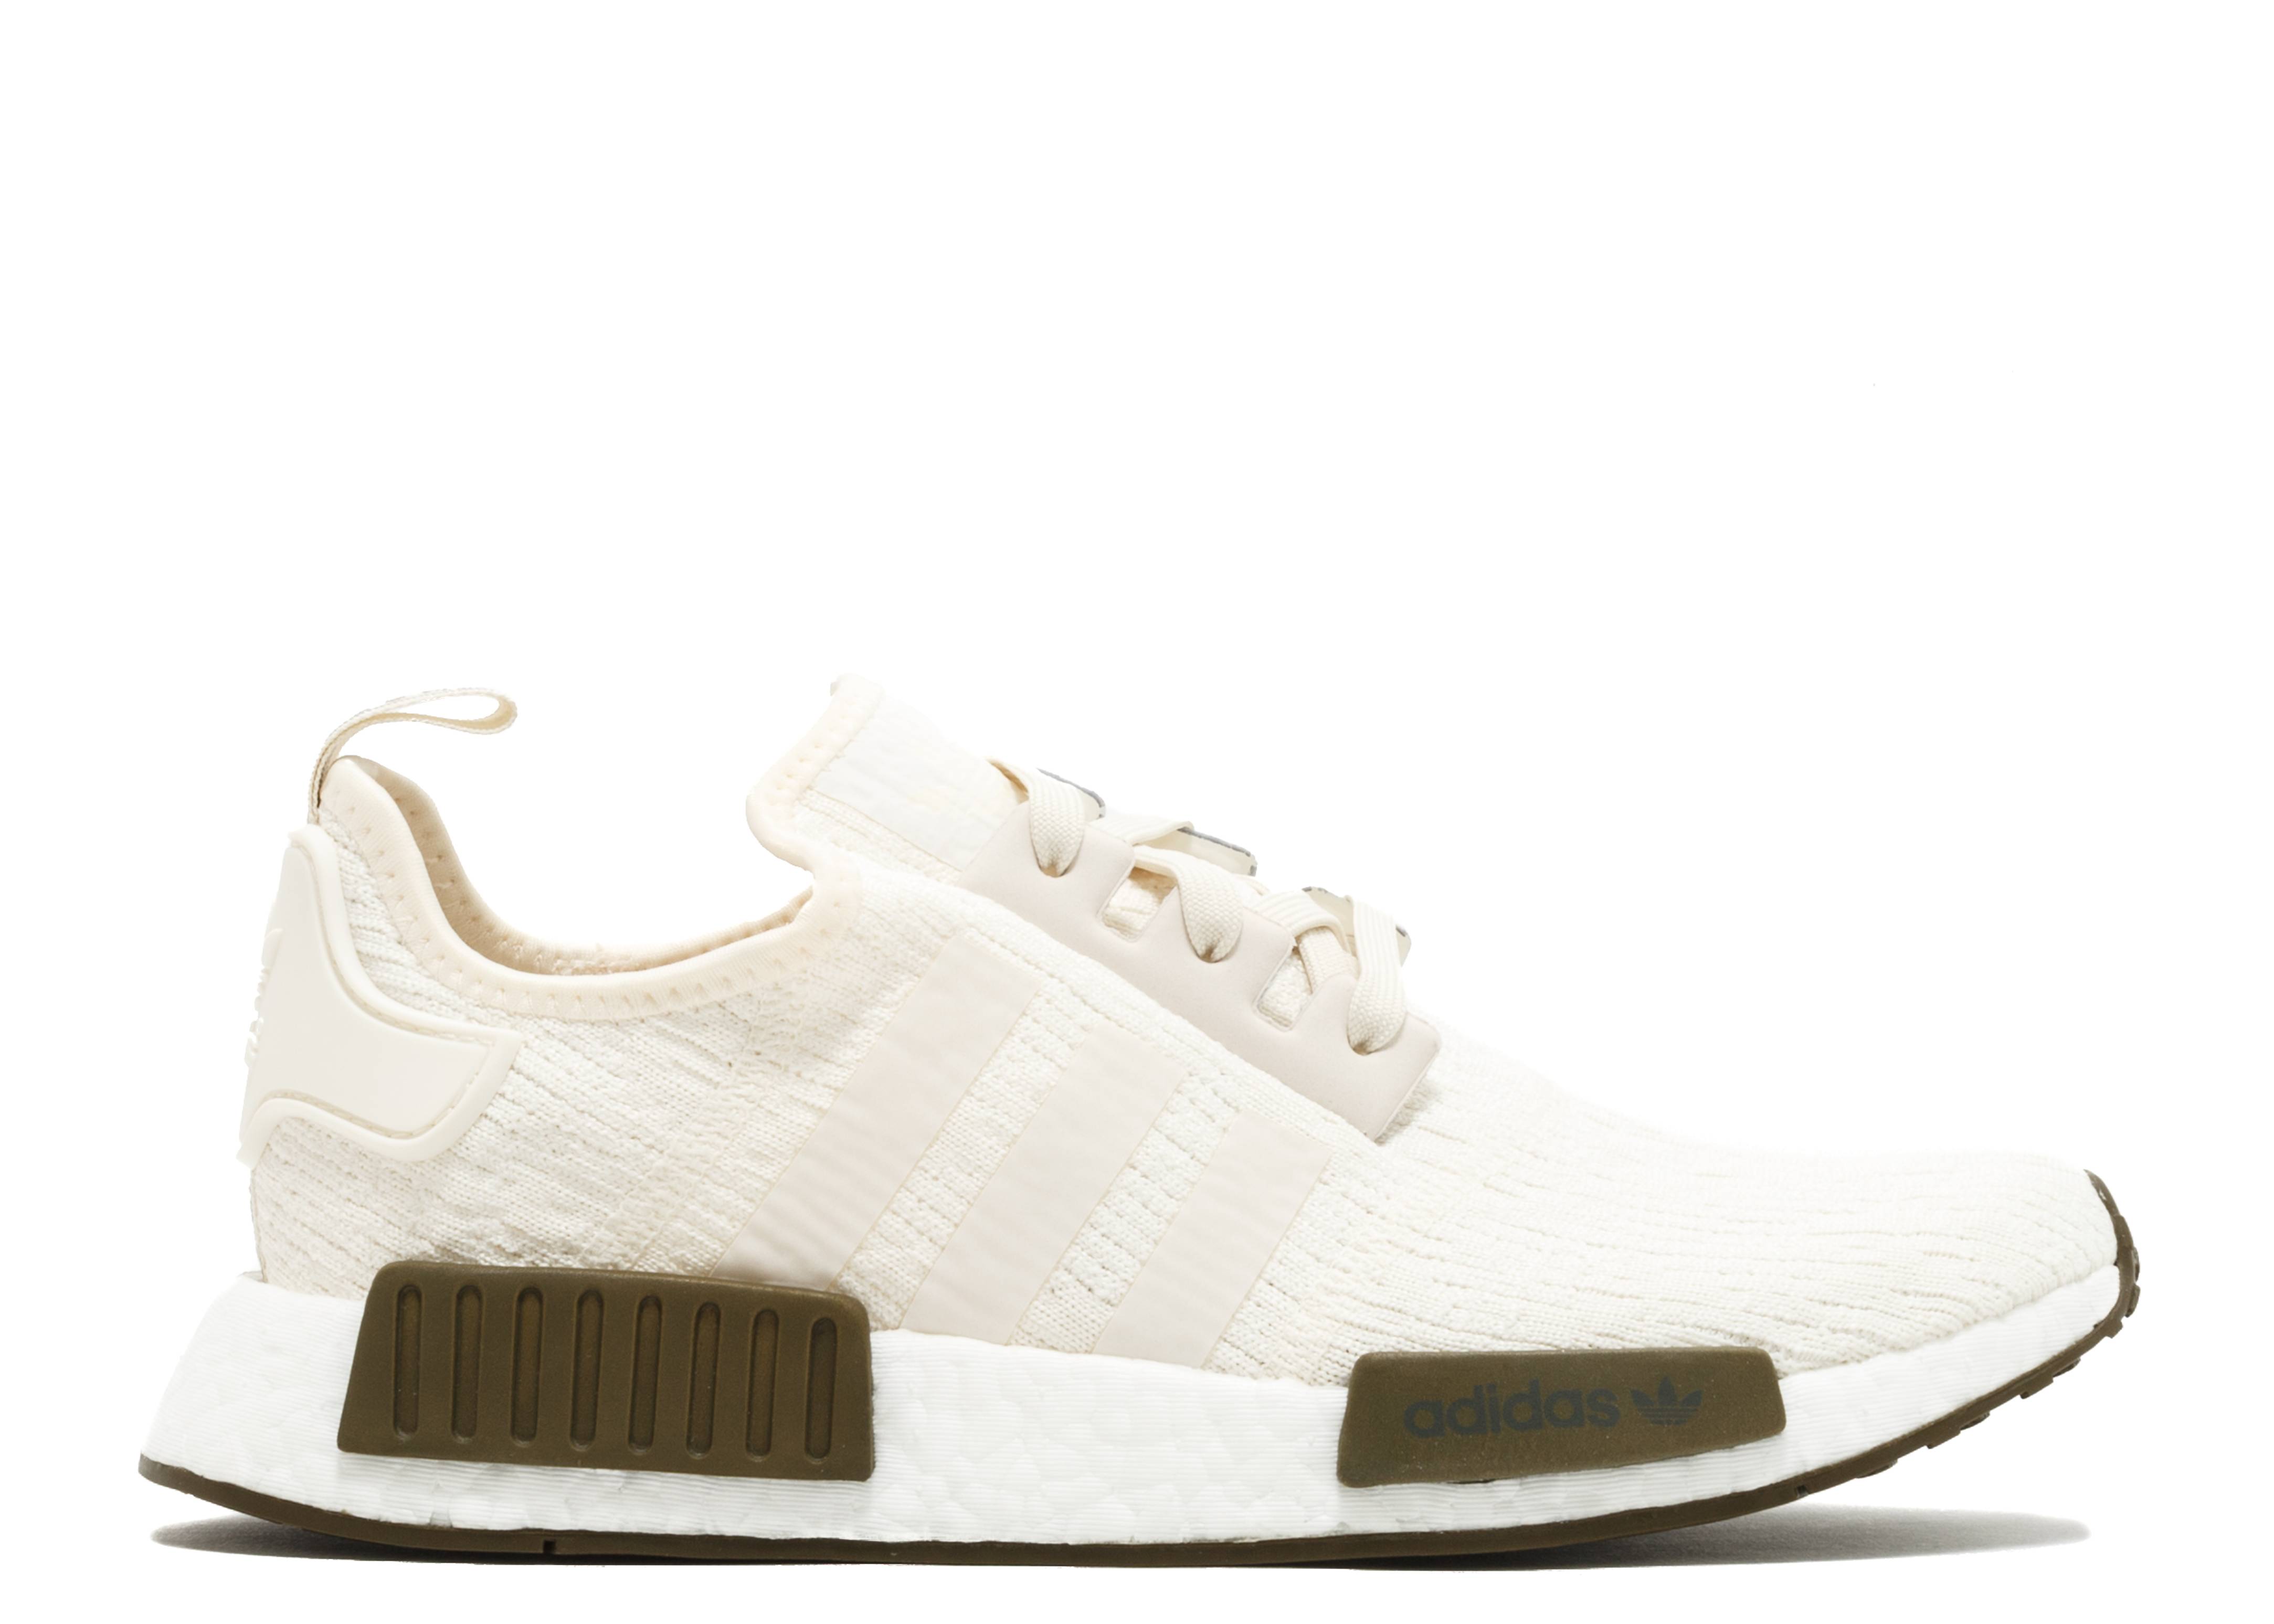 Champs Sports x NMD_R1 'Chalk and Olive'